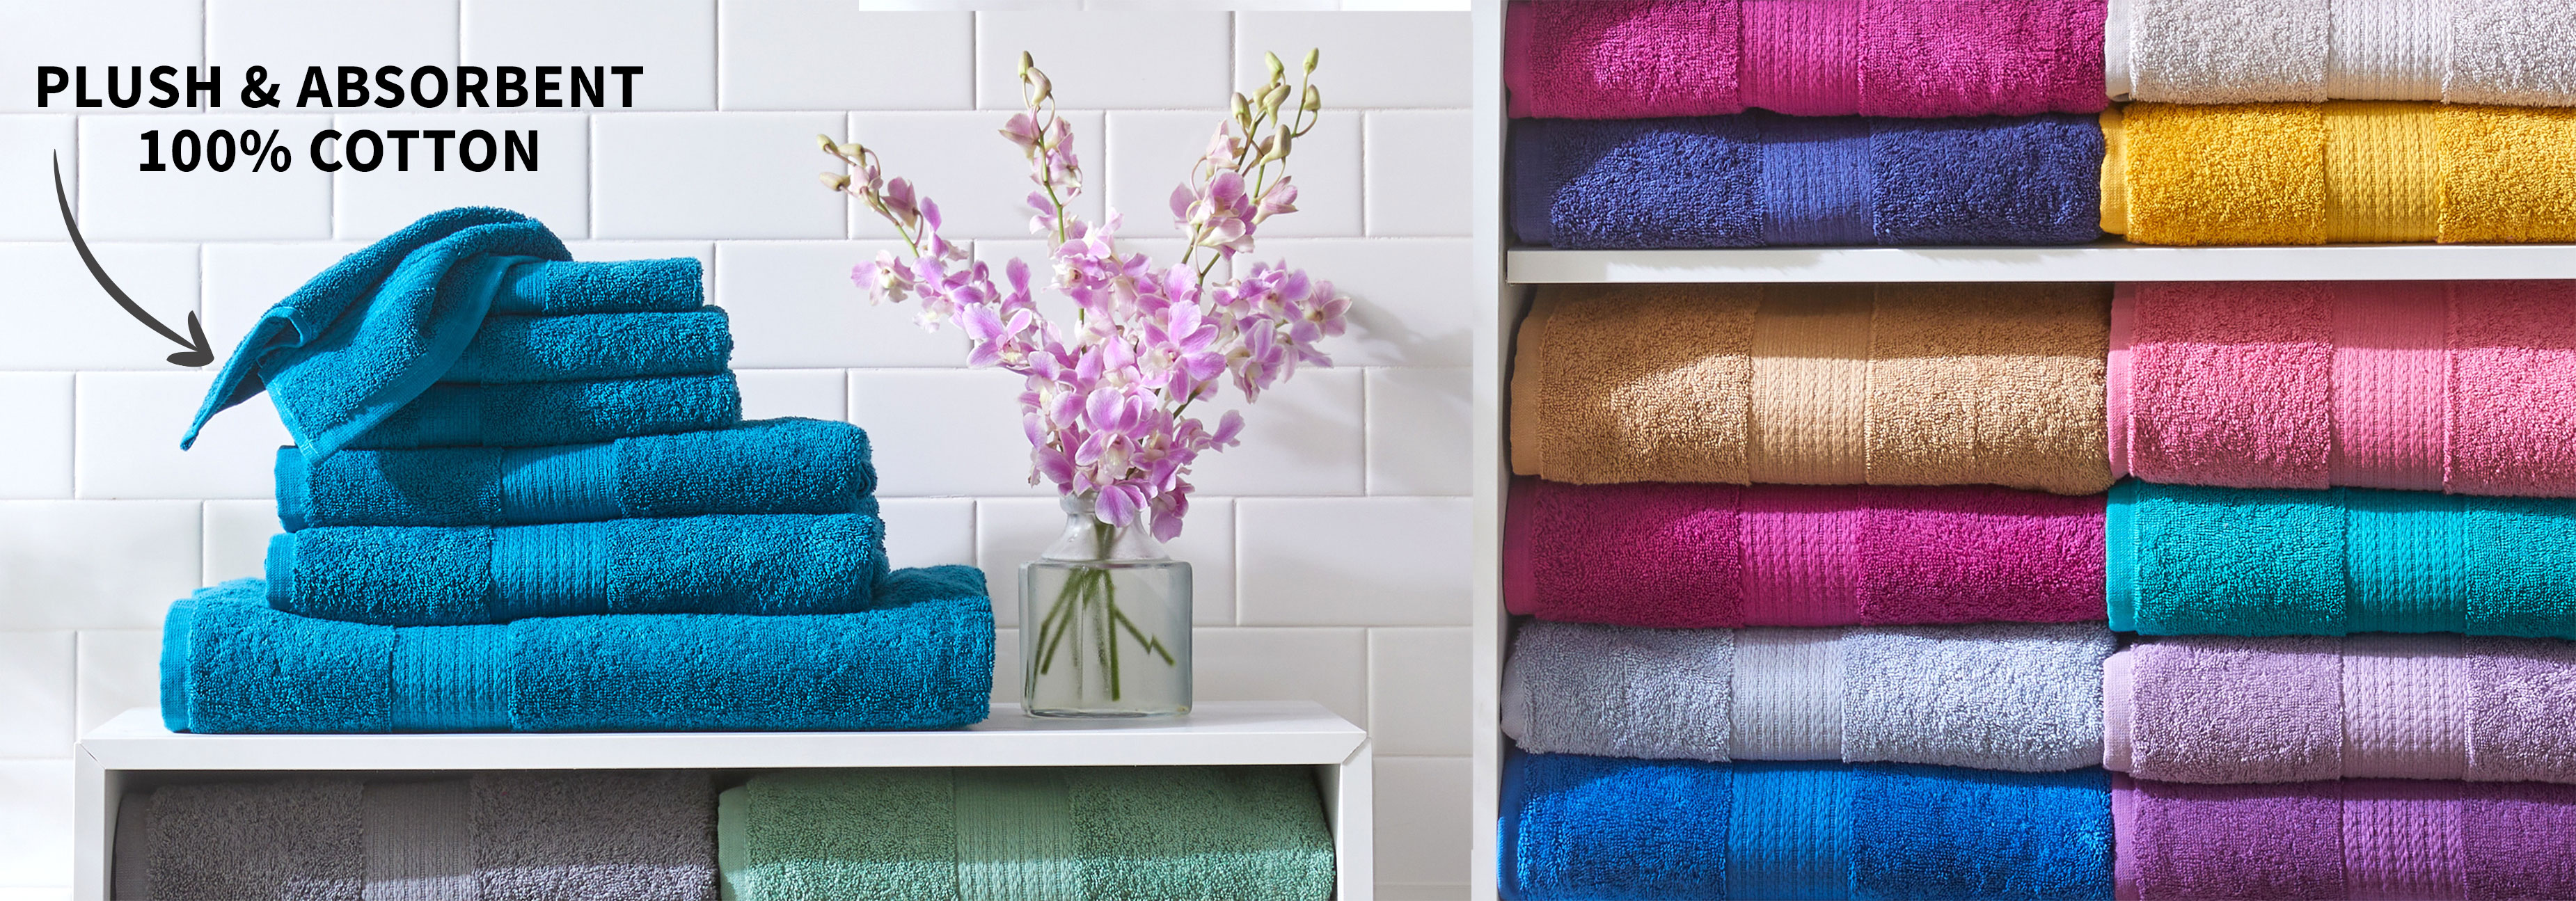 Plush and absorbent 100% cotton towels.